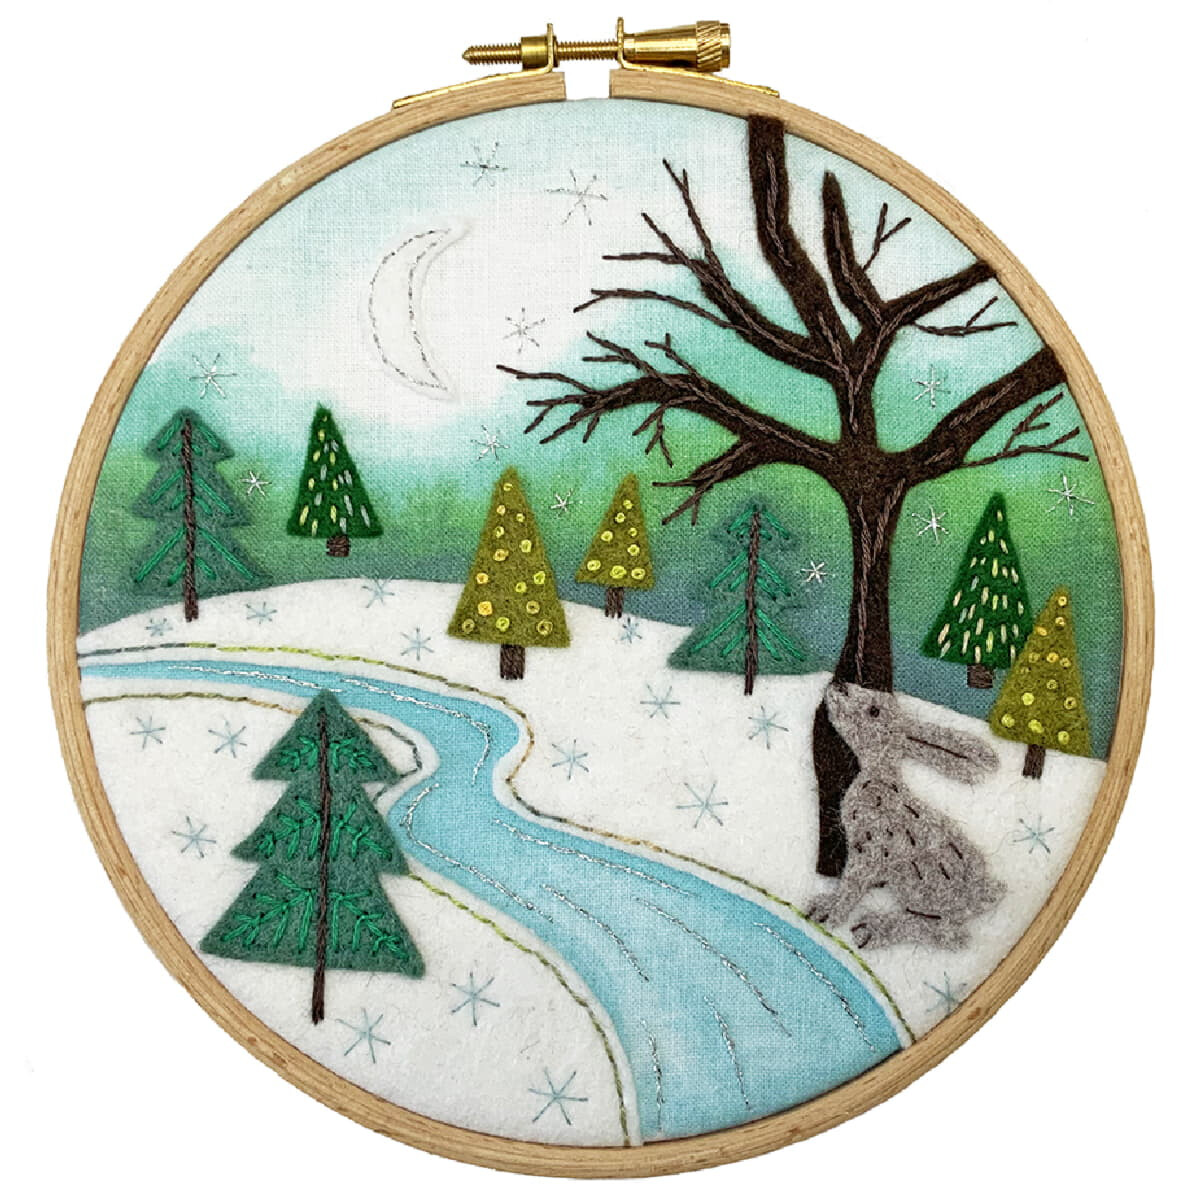 Embroidery depicting a snowy landscape with a crescent...